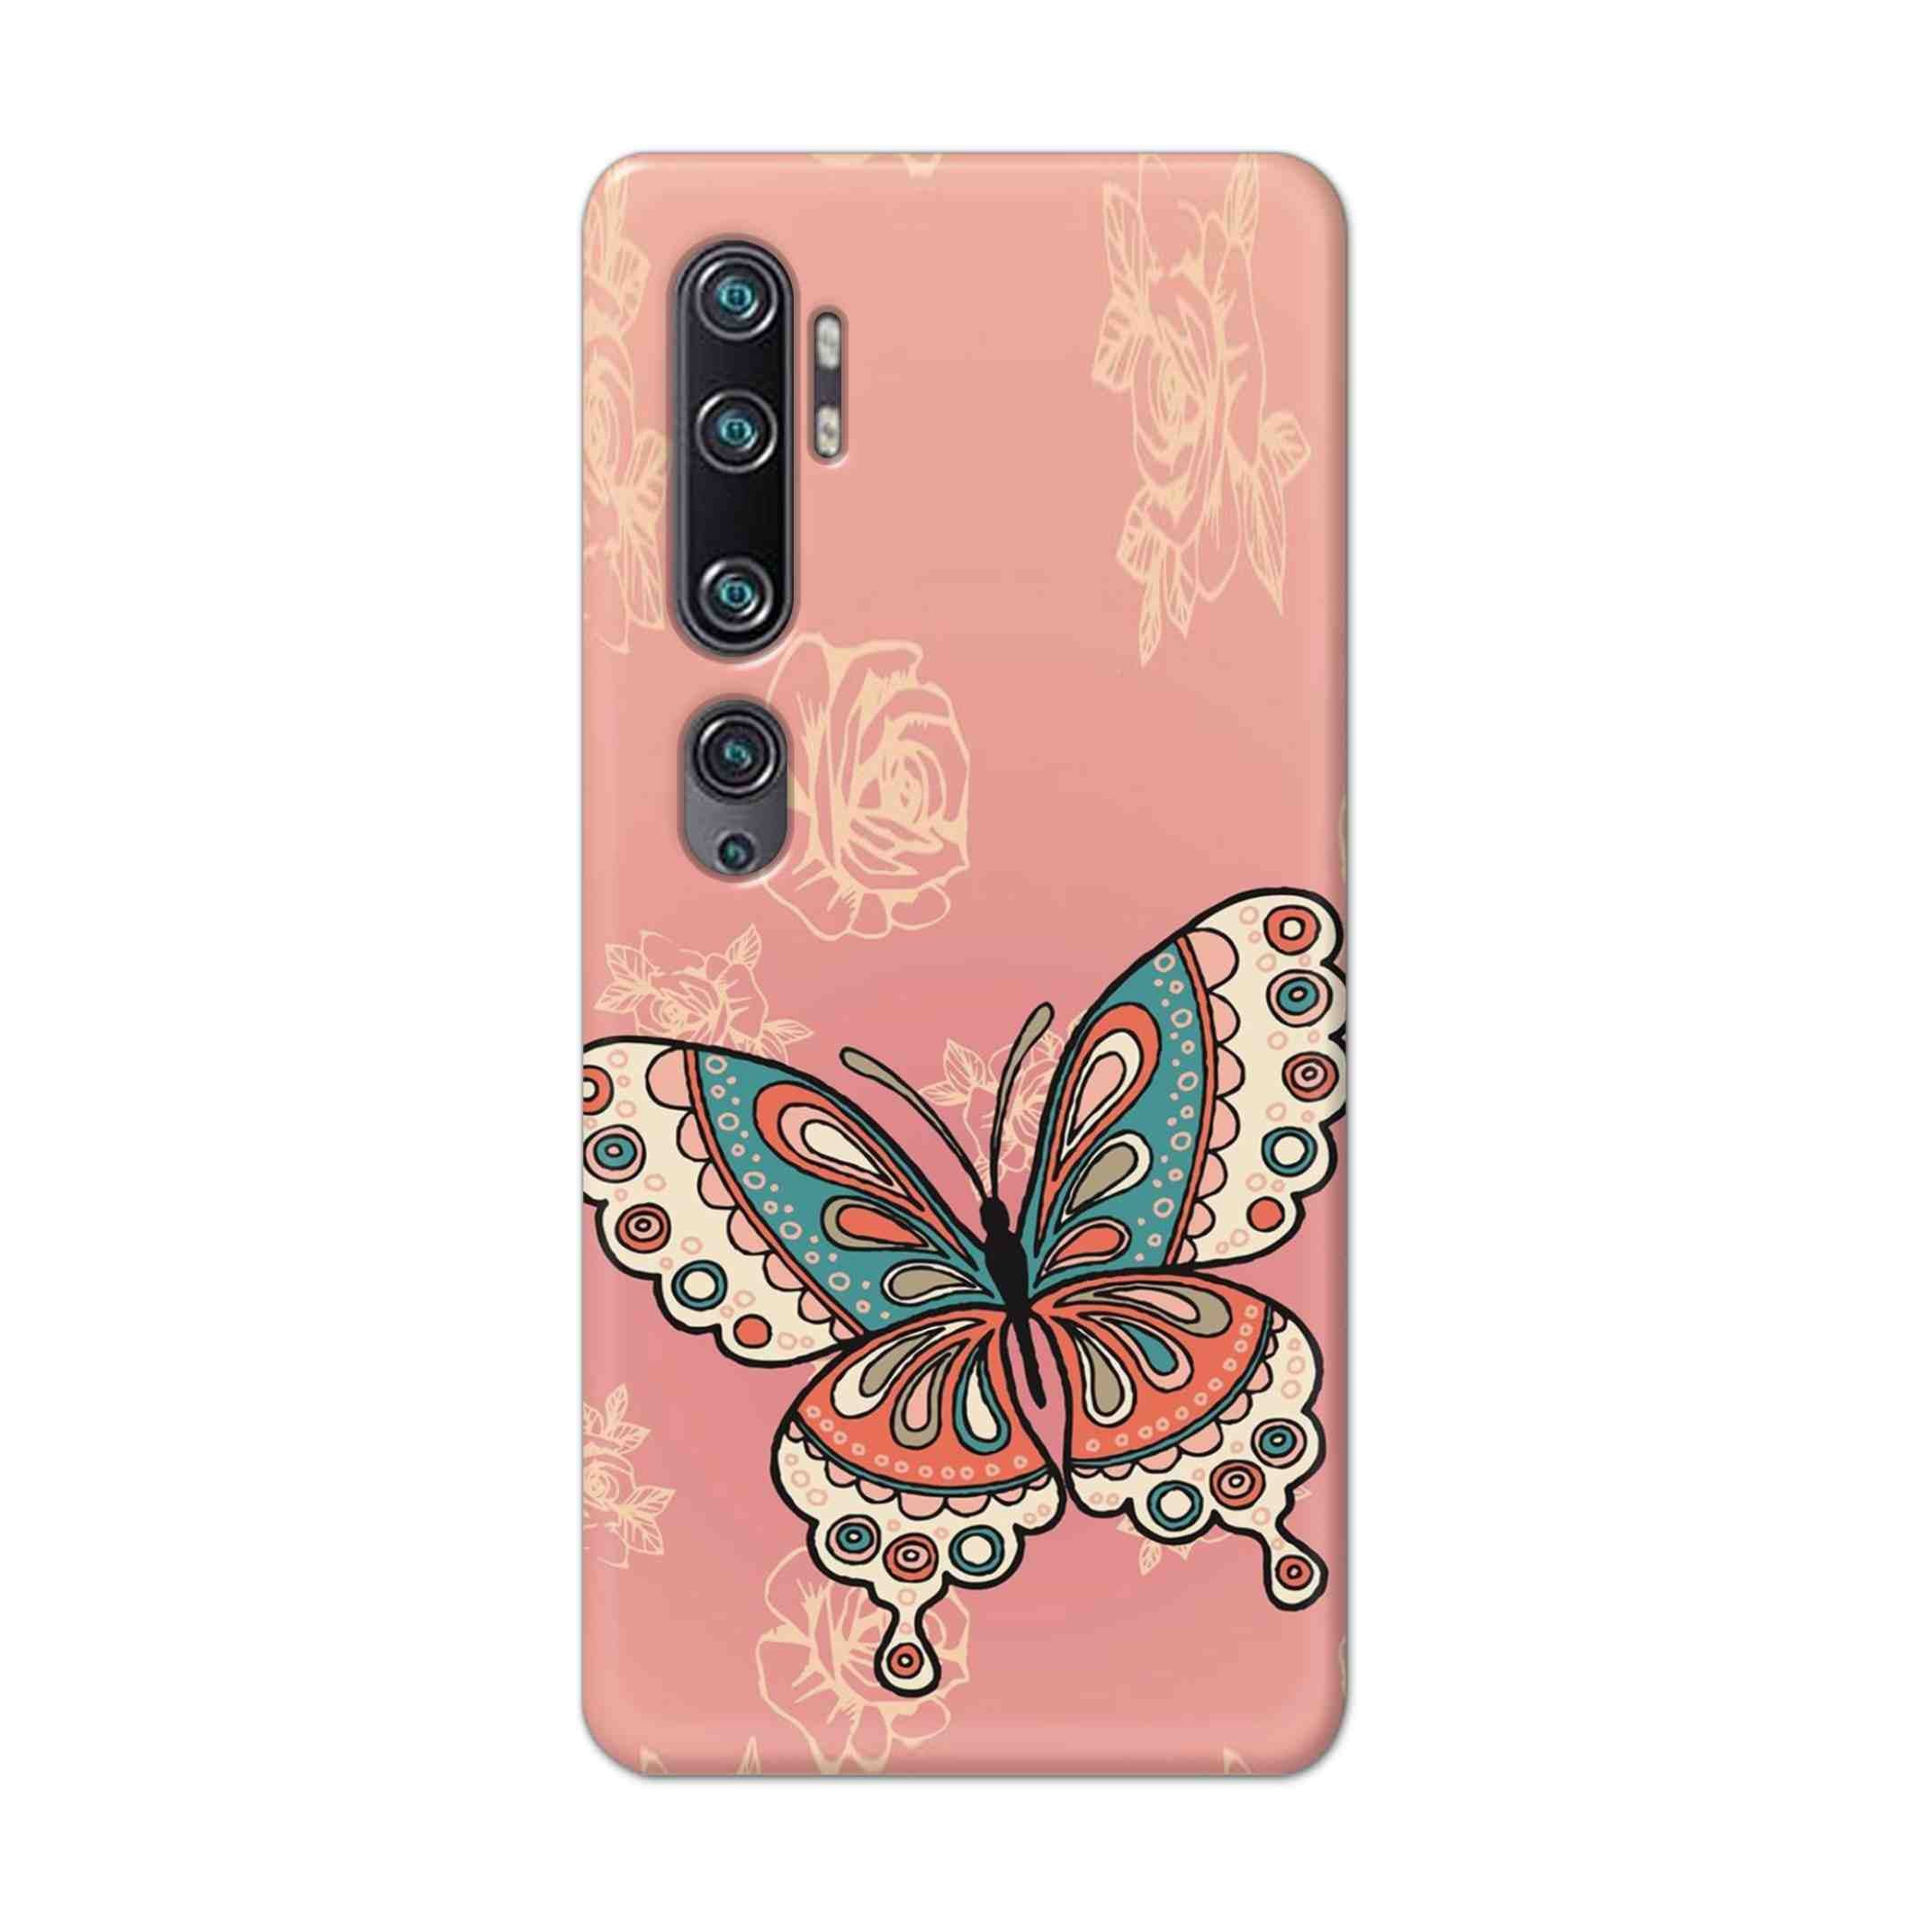 Buy Butterfly Hard Back Mobile Phone Case Cover For Xiaomi Mi Note 10 Pro Online